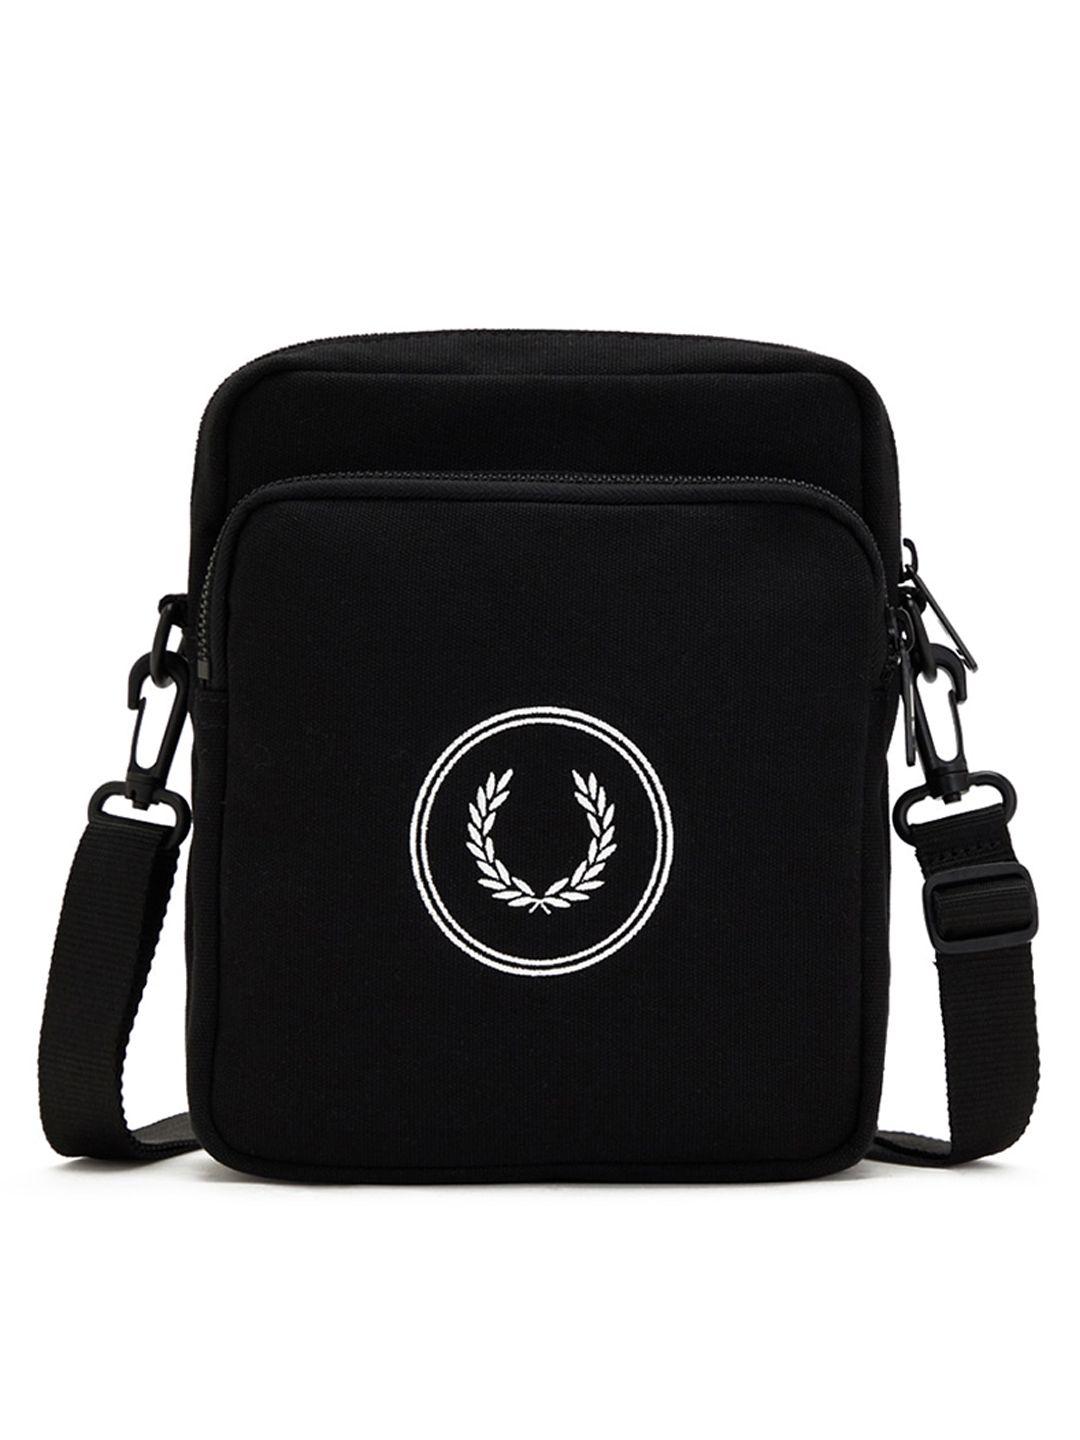 fred perry swagger sling bag